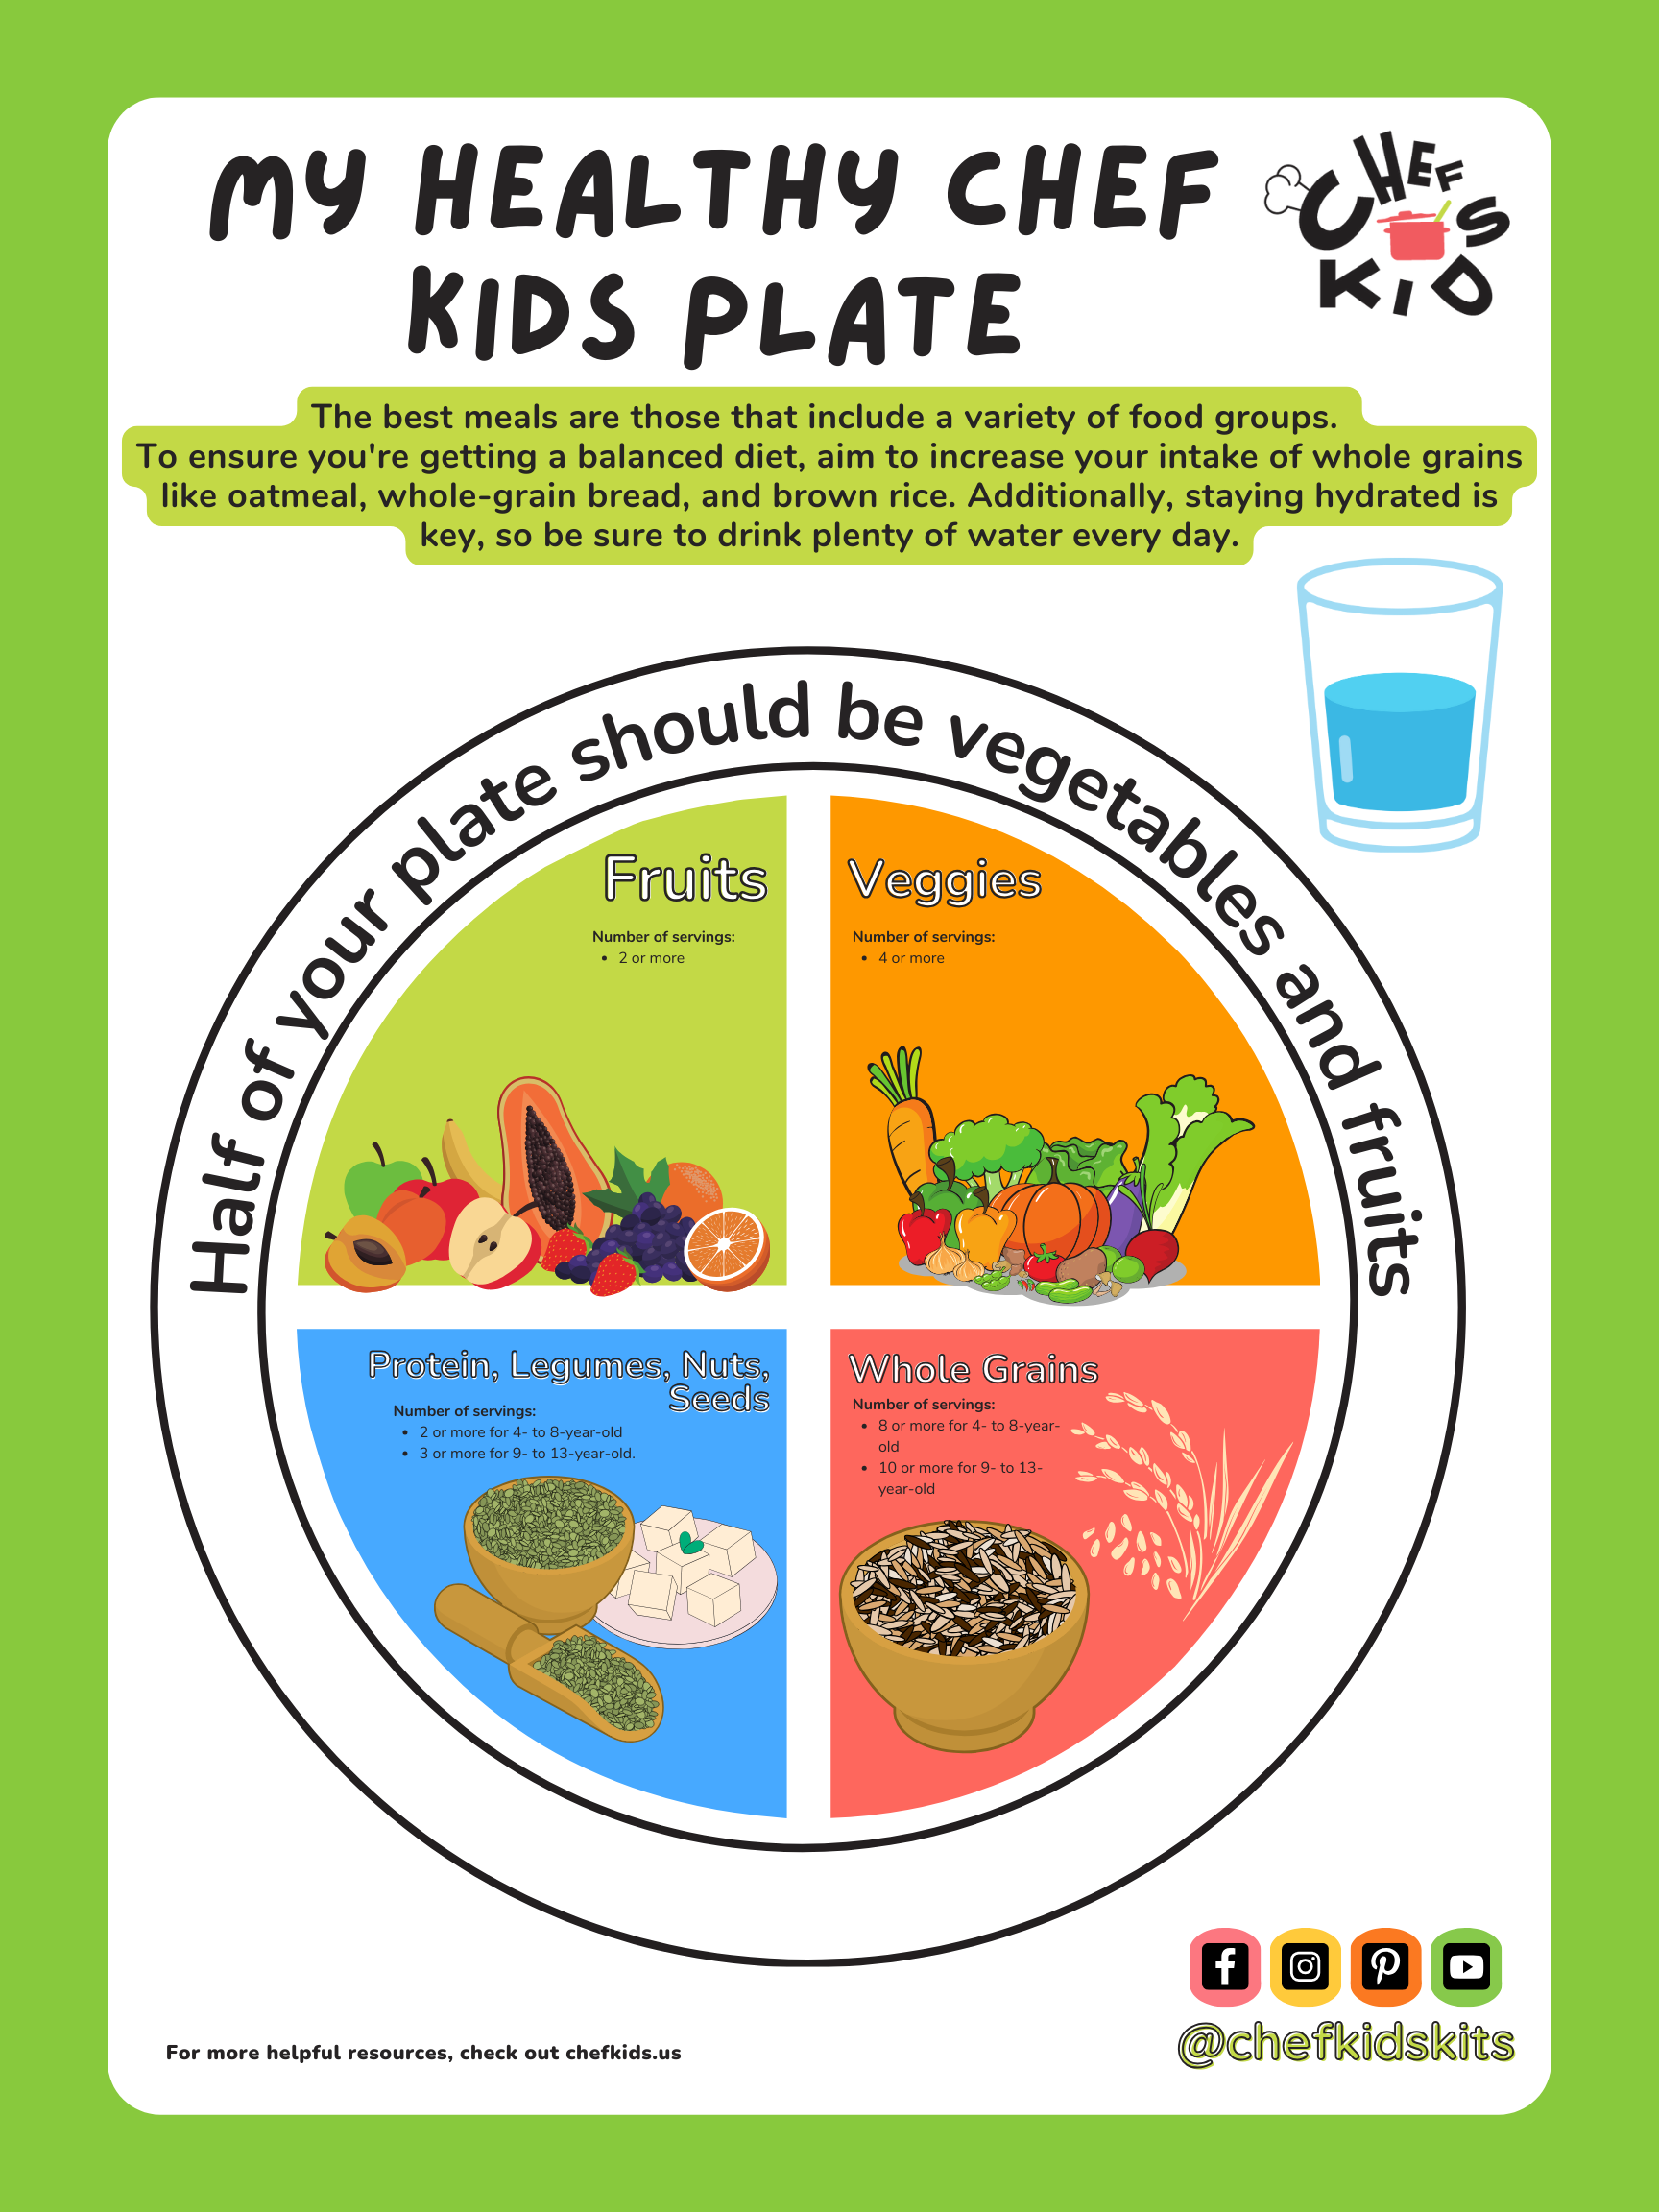 My Healthy Chef Kids Plate Guide Poster FREE DOWNLOAD